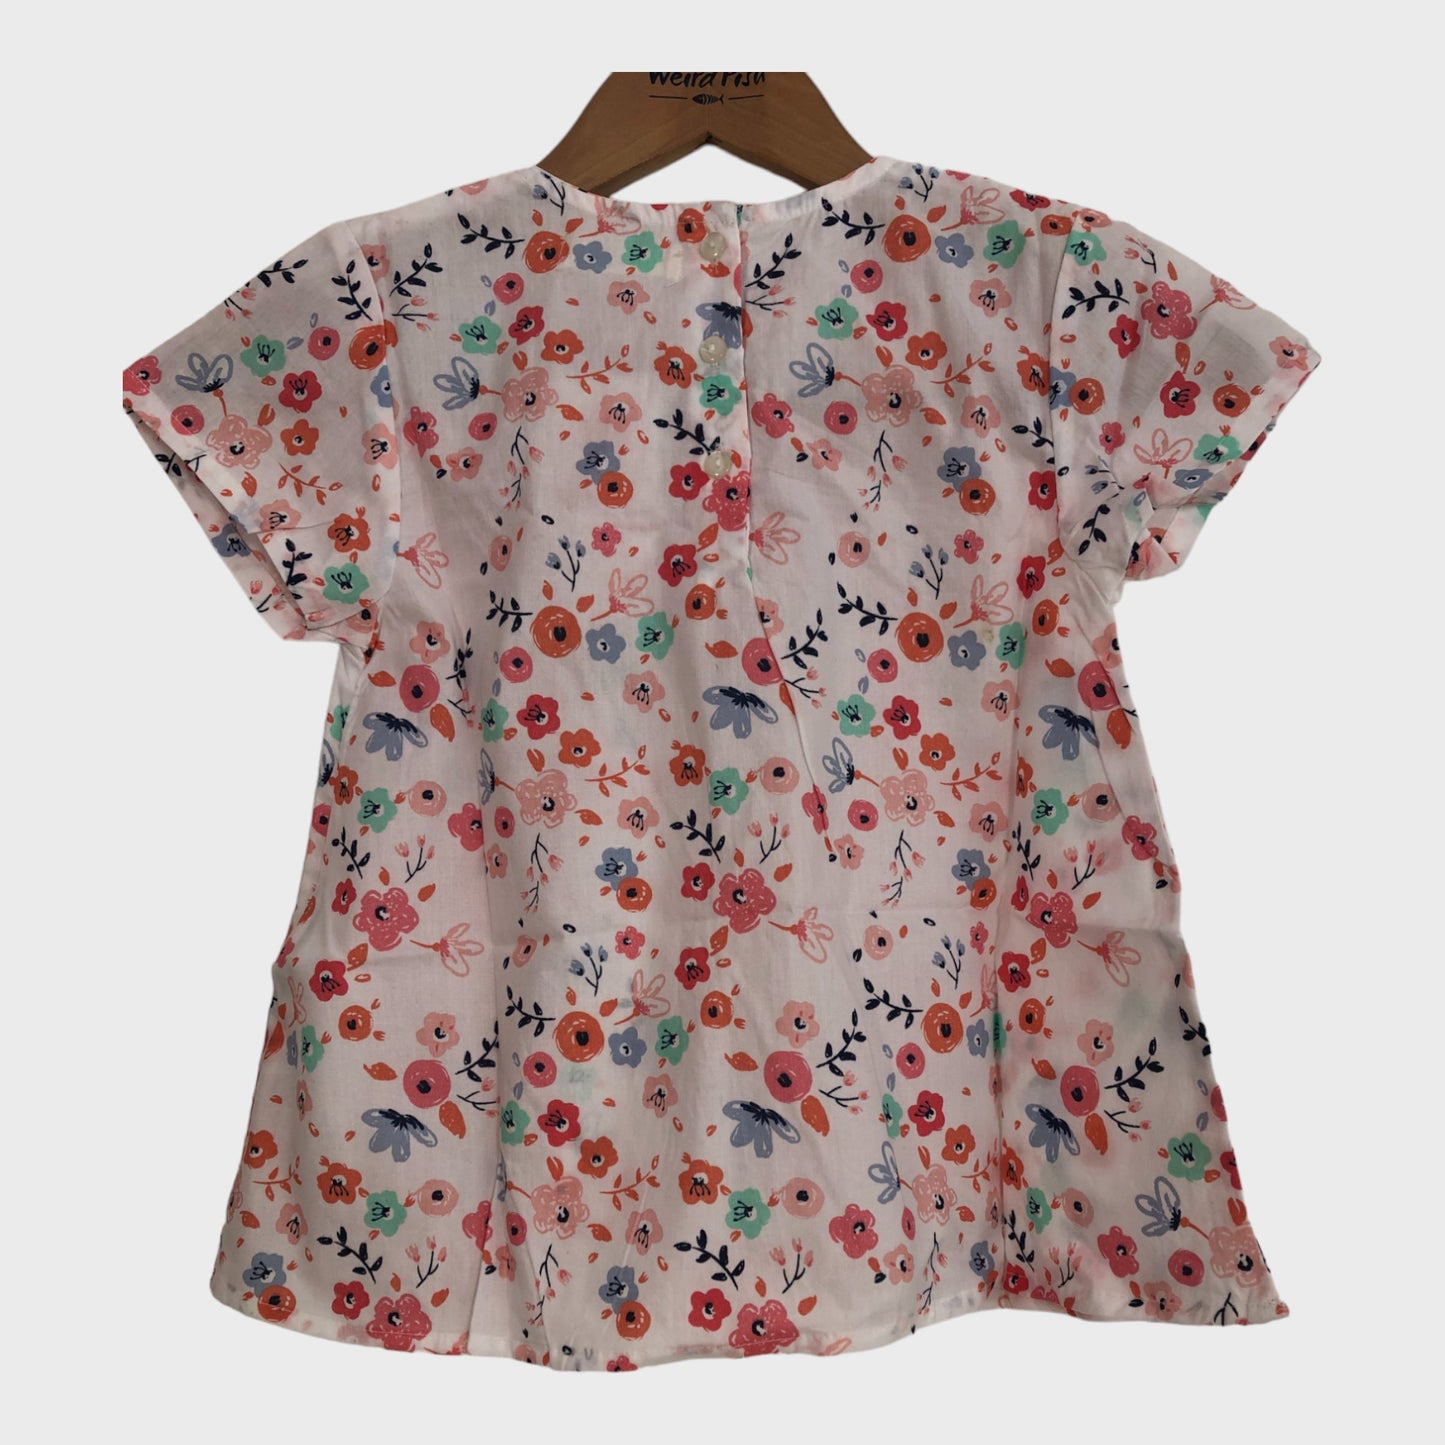 Girl's Floral Summer Top